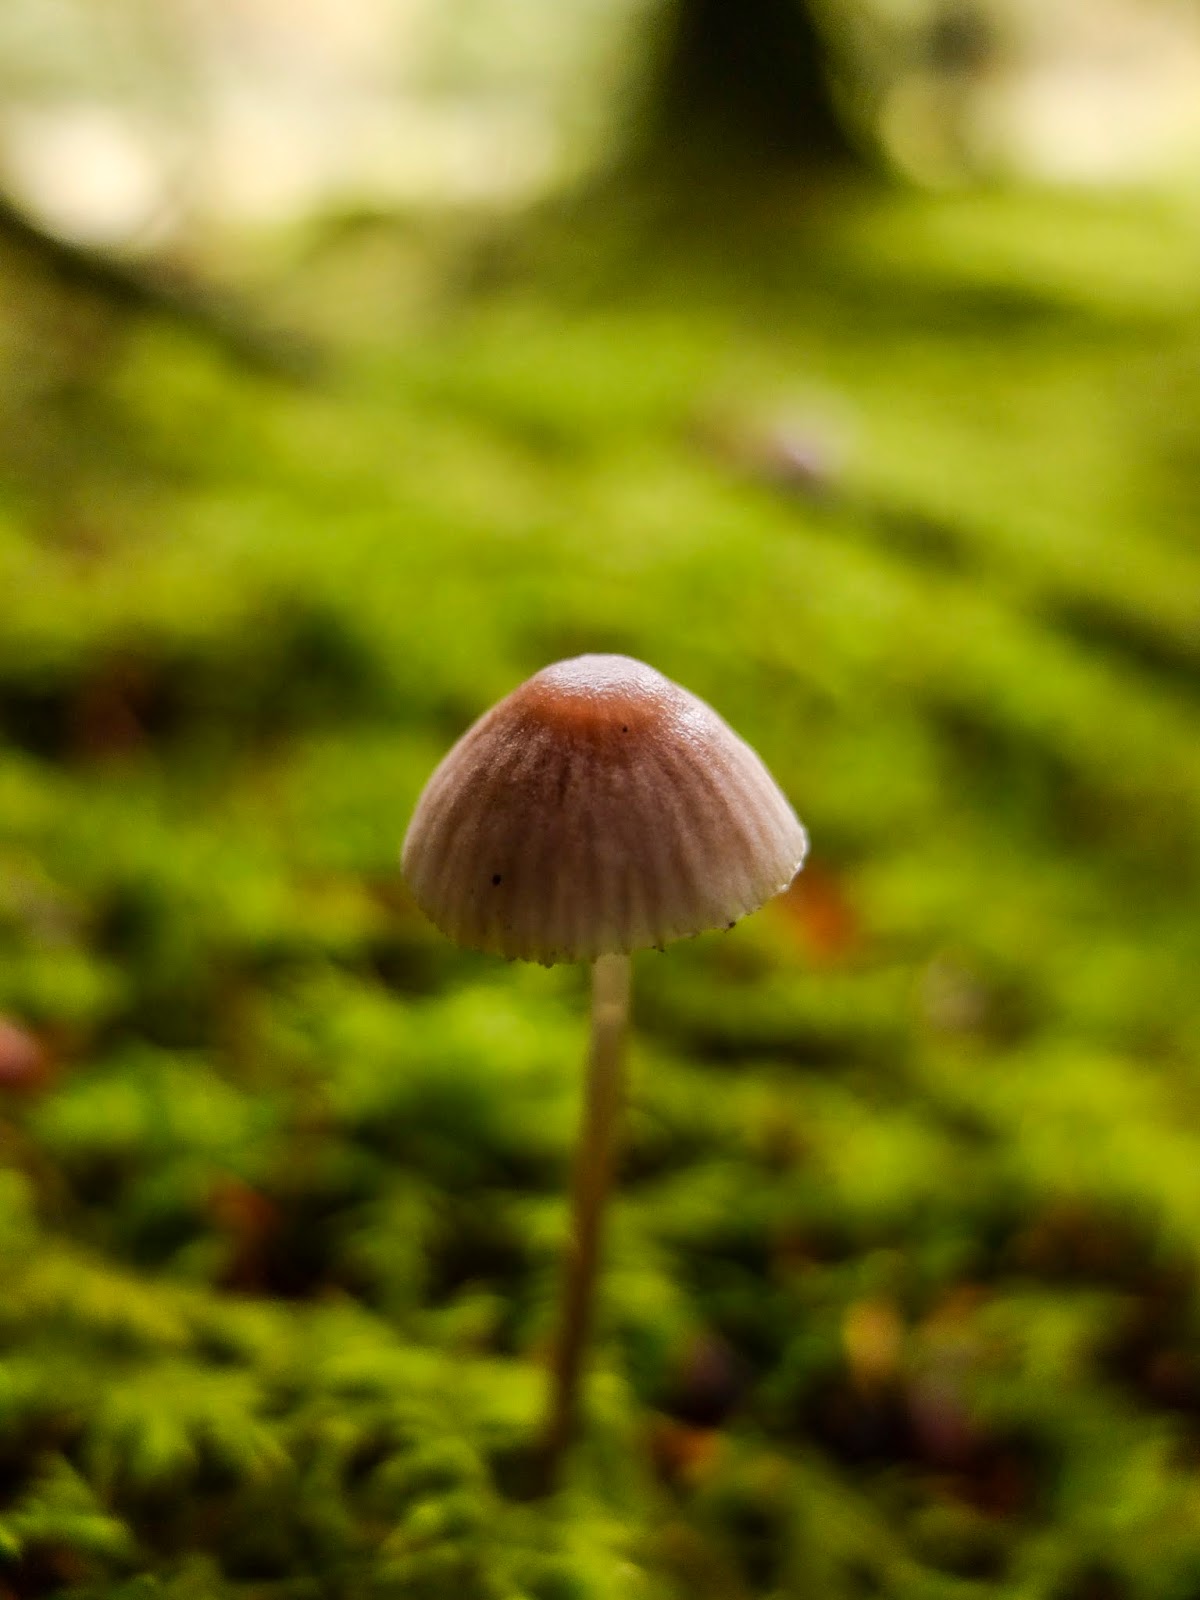 A small wild mushroom growing out of a mossy forest floor.